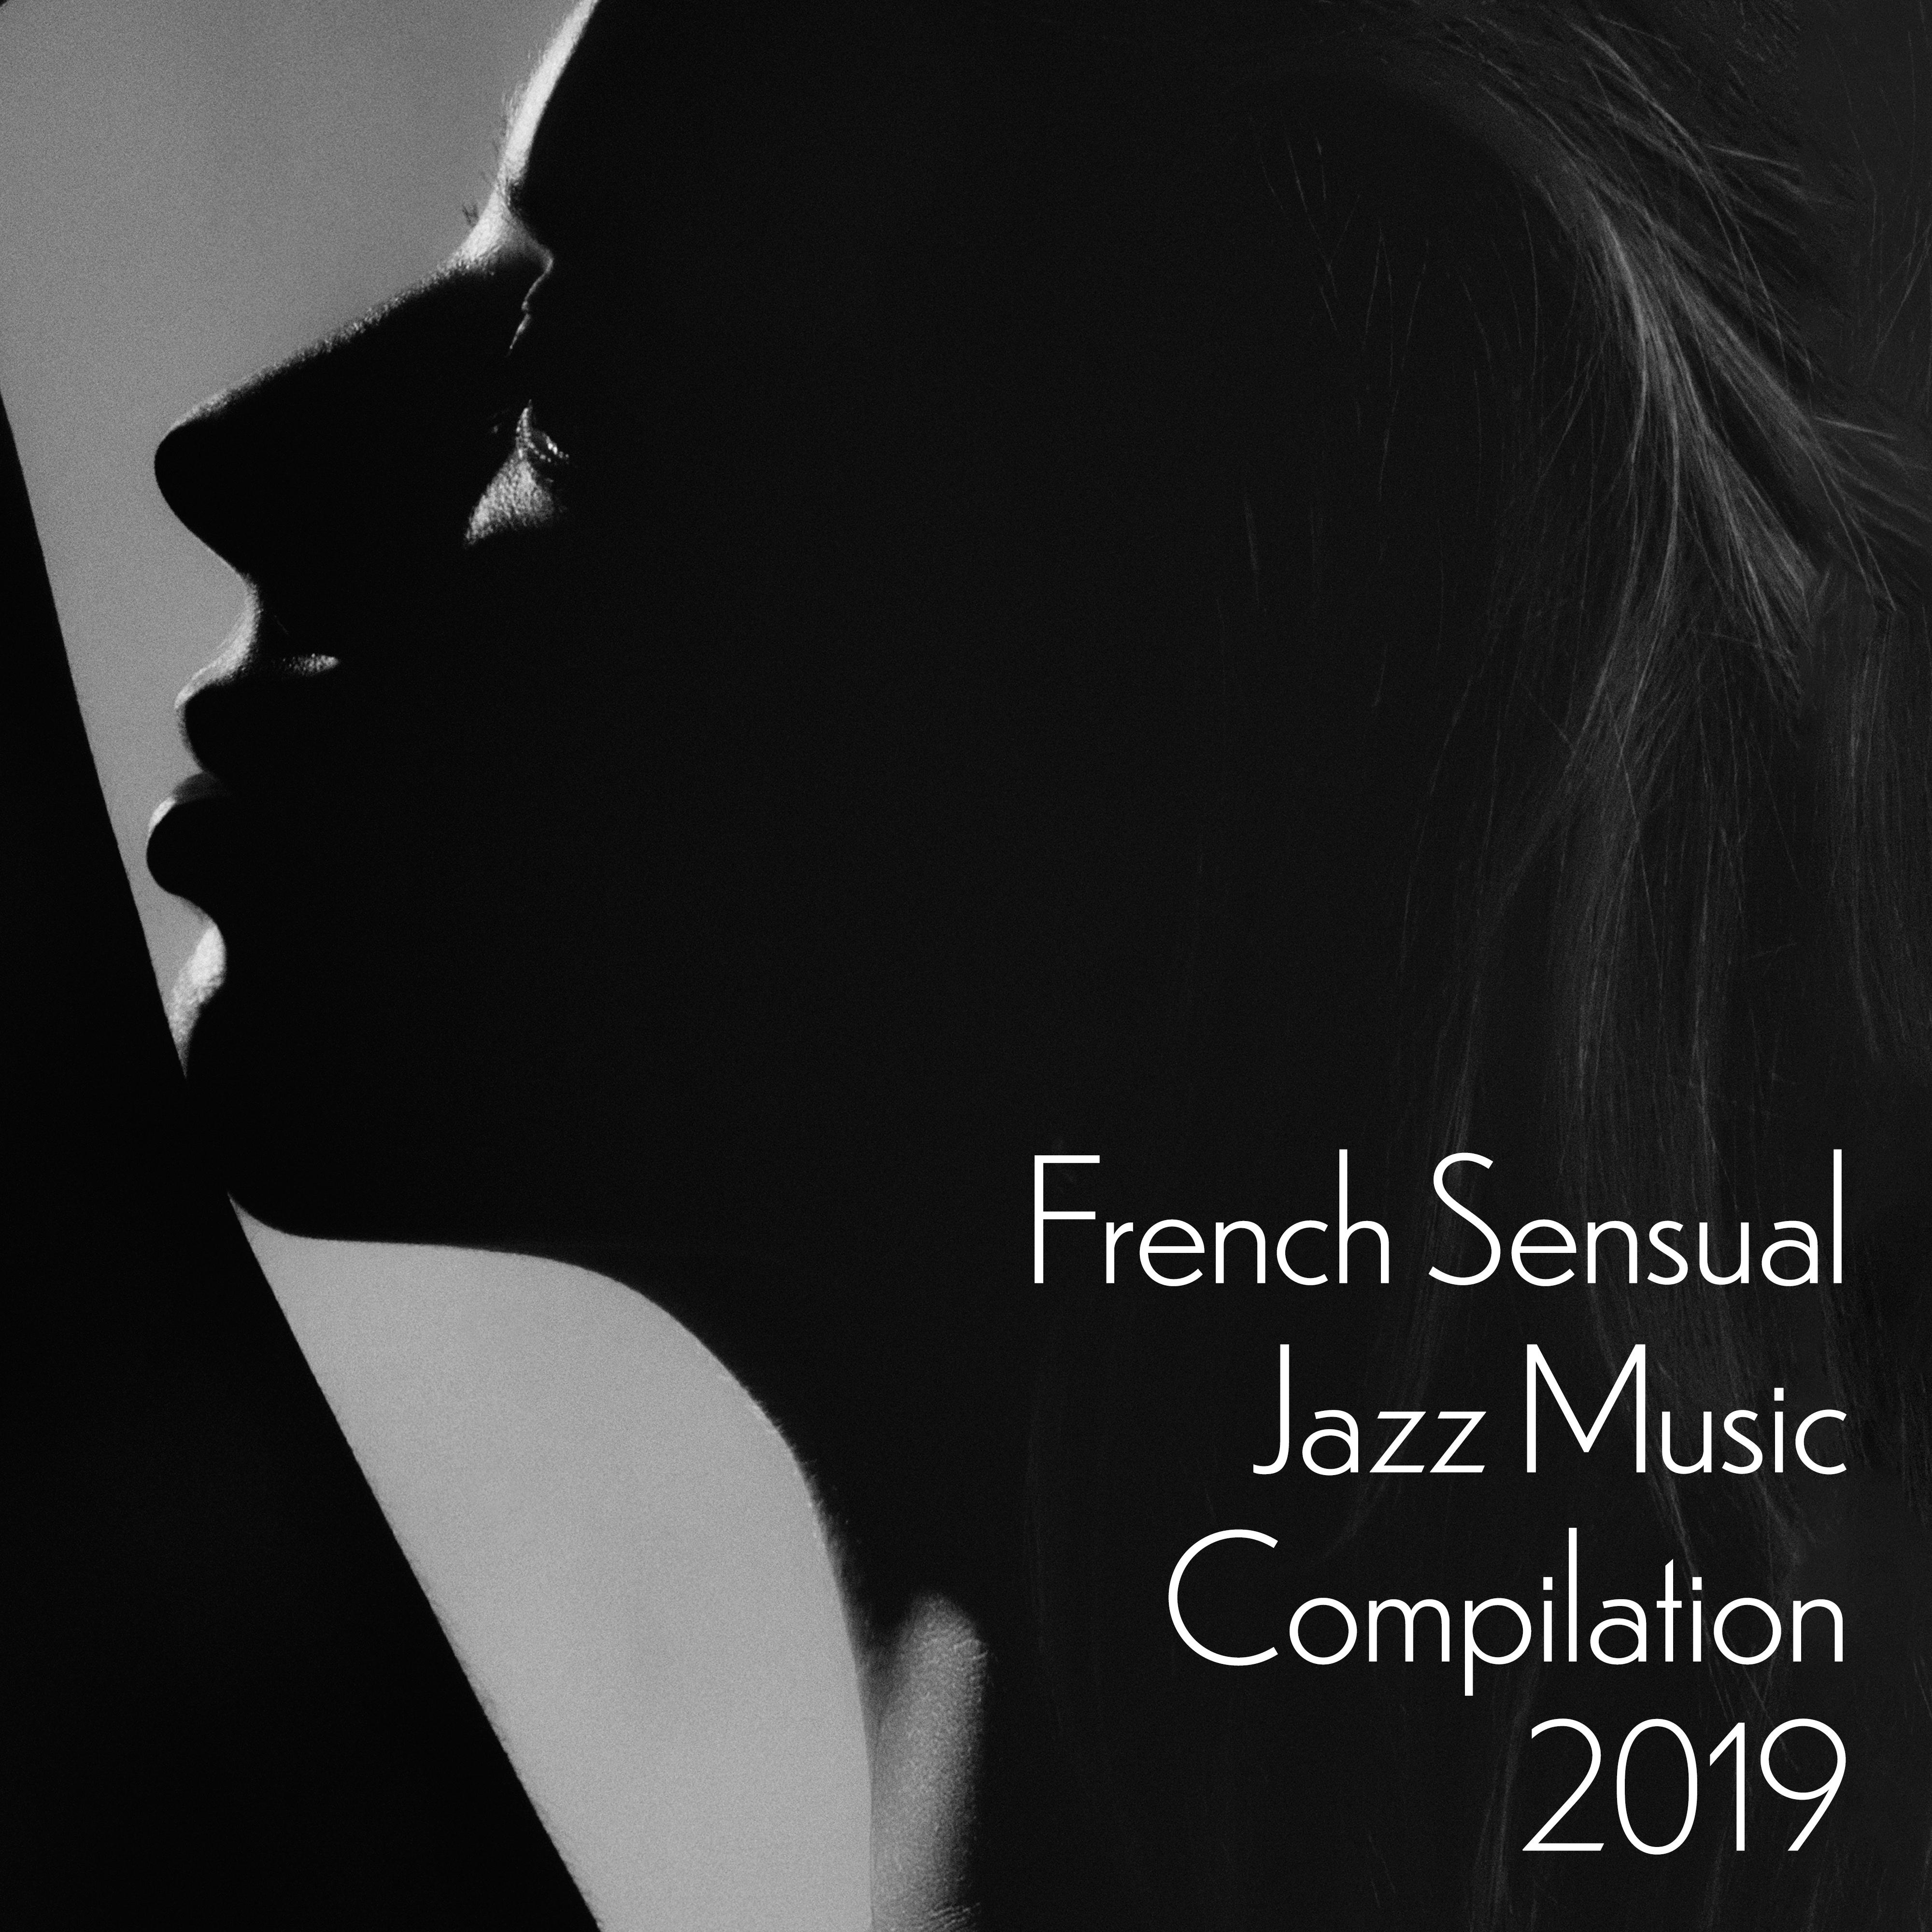 French Sensual Jazz Music Compilation 2019